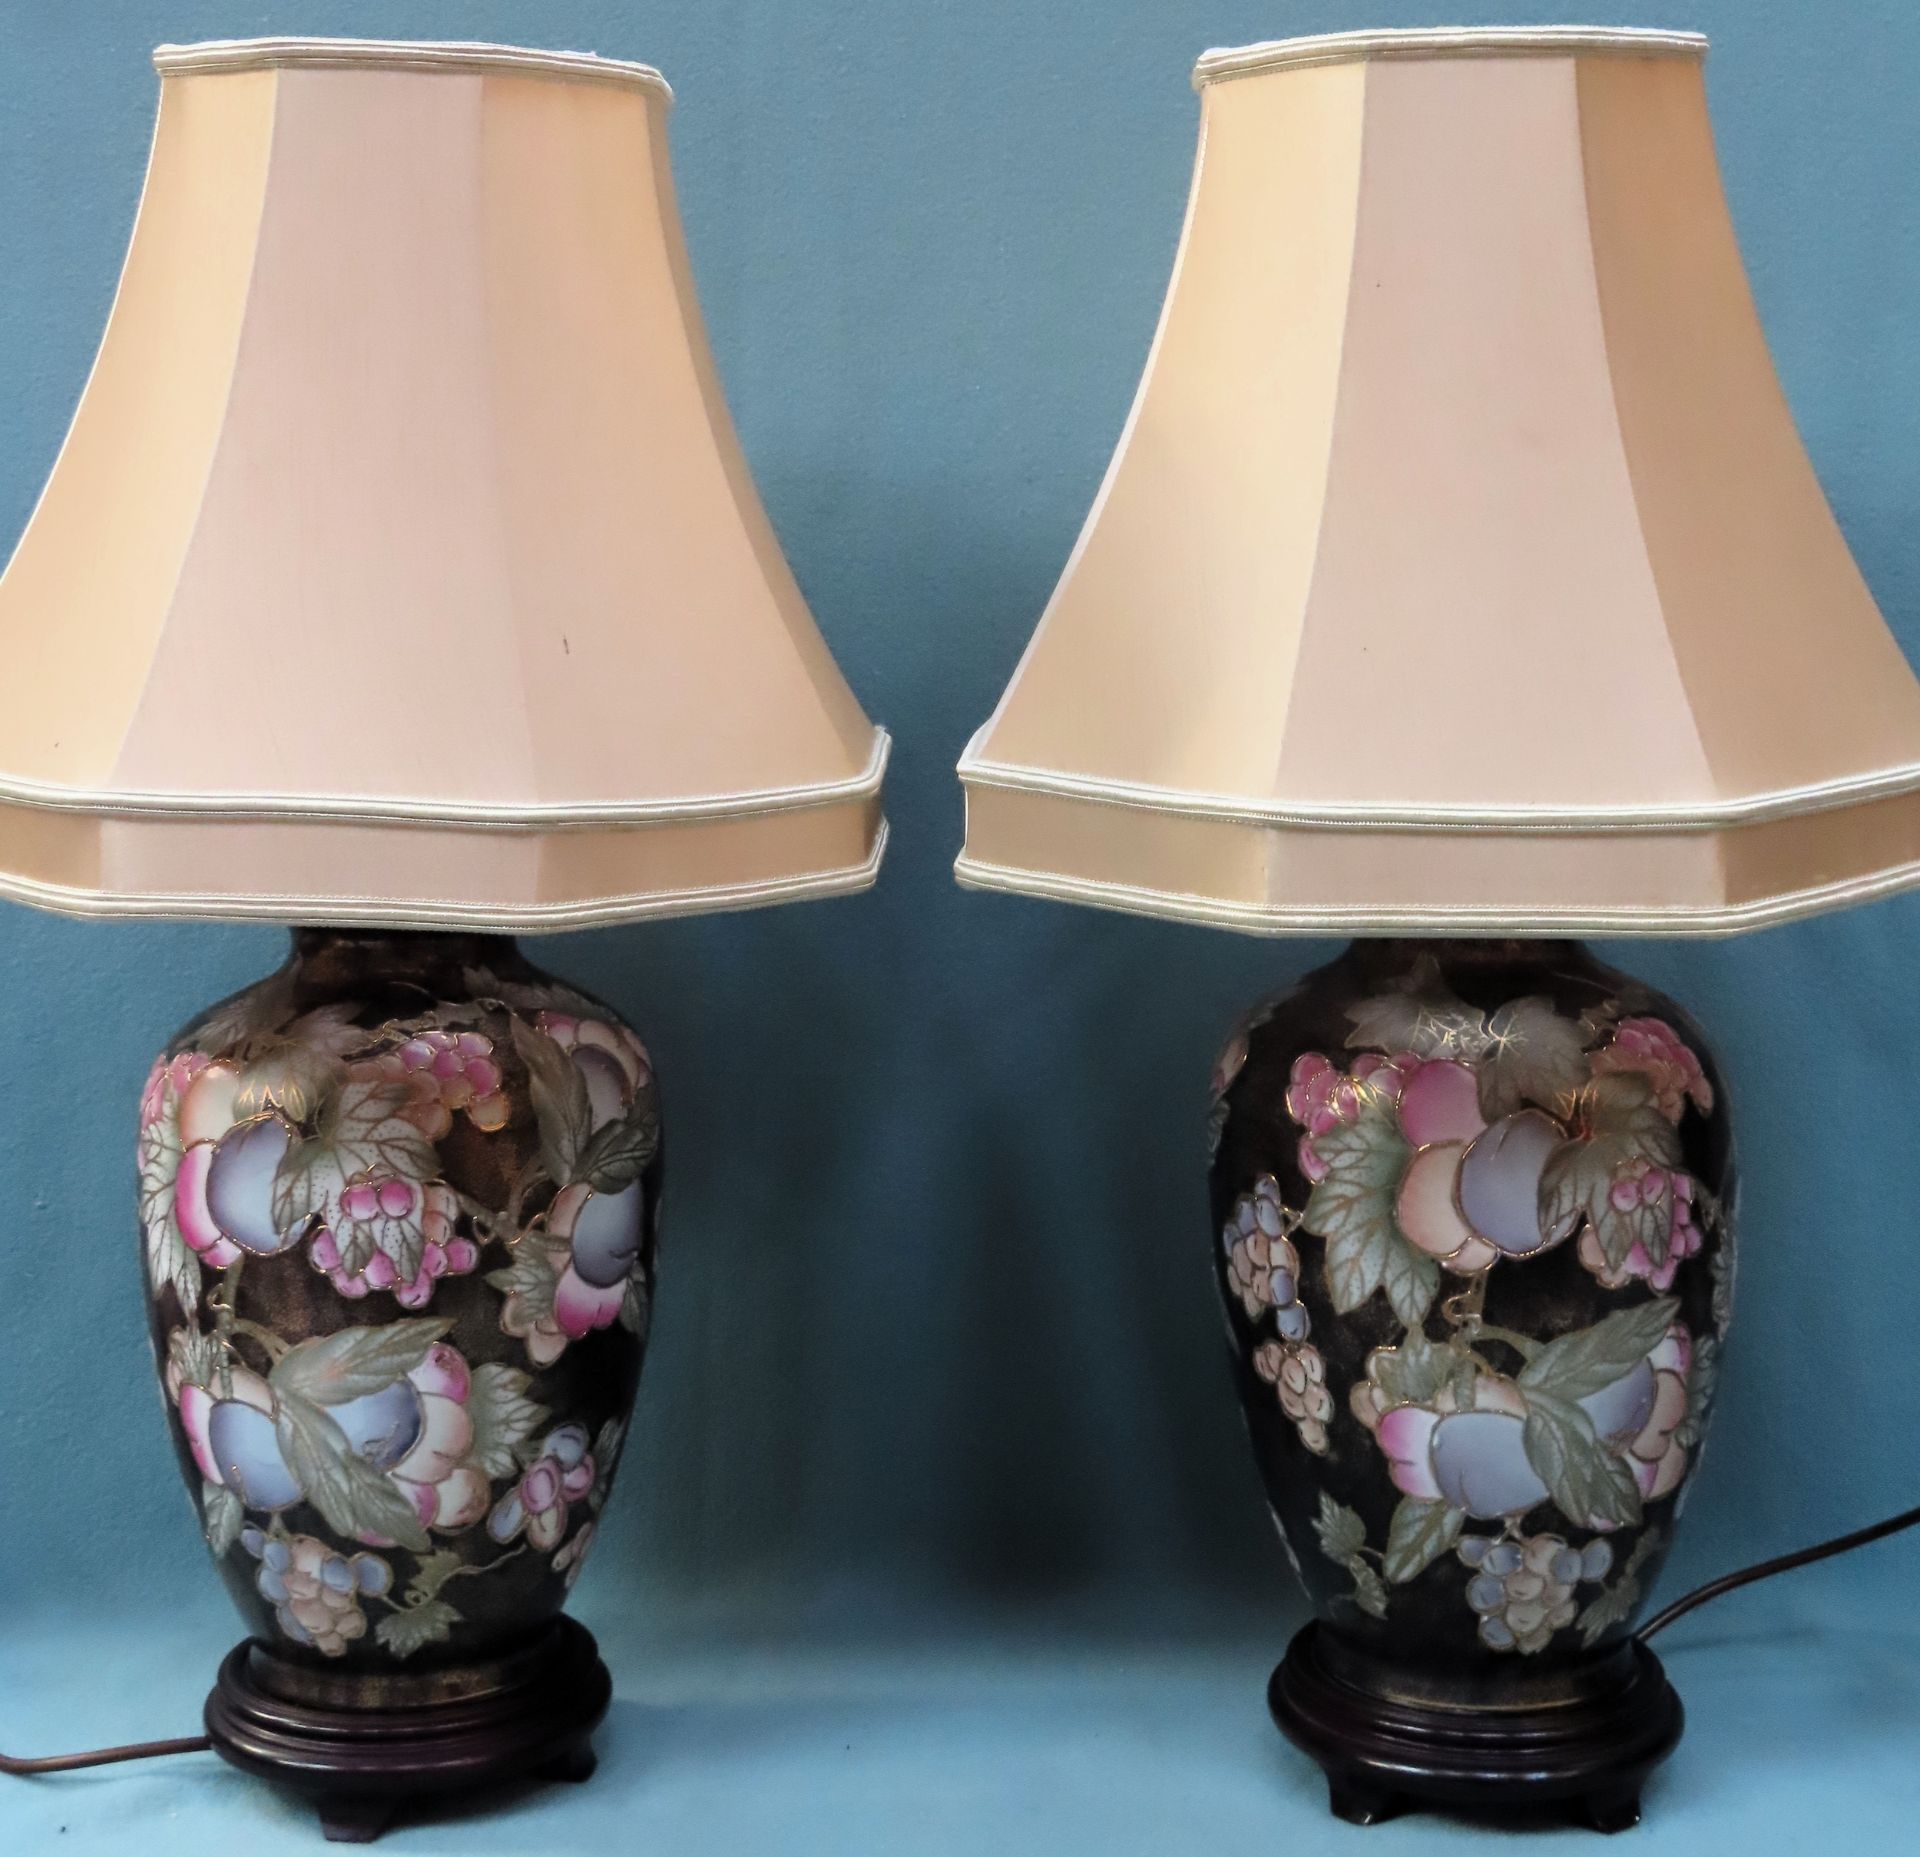 Pair of Oriental style ceramic table lamps with shades. Approx. 65cms H Inc. shades appear